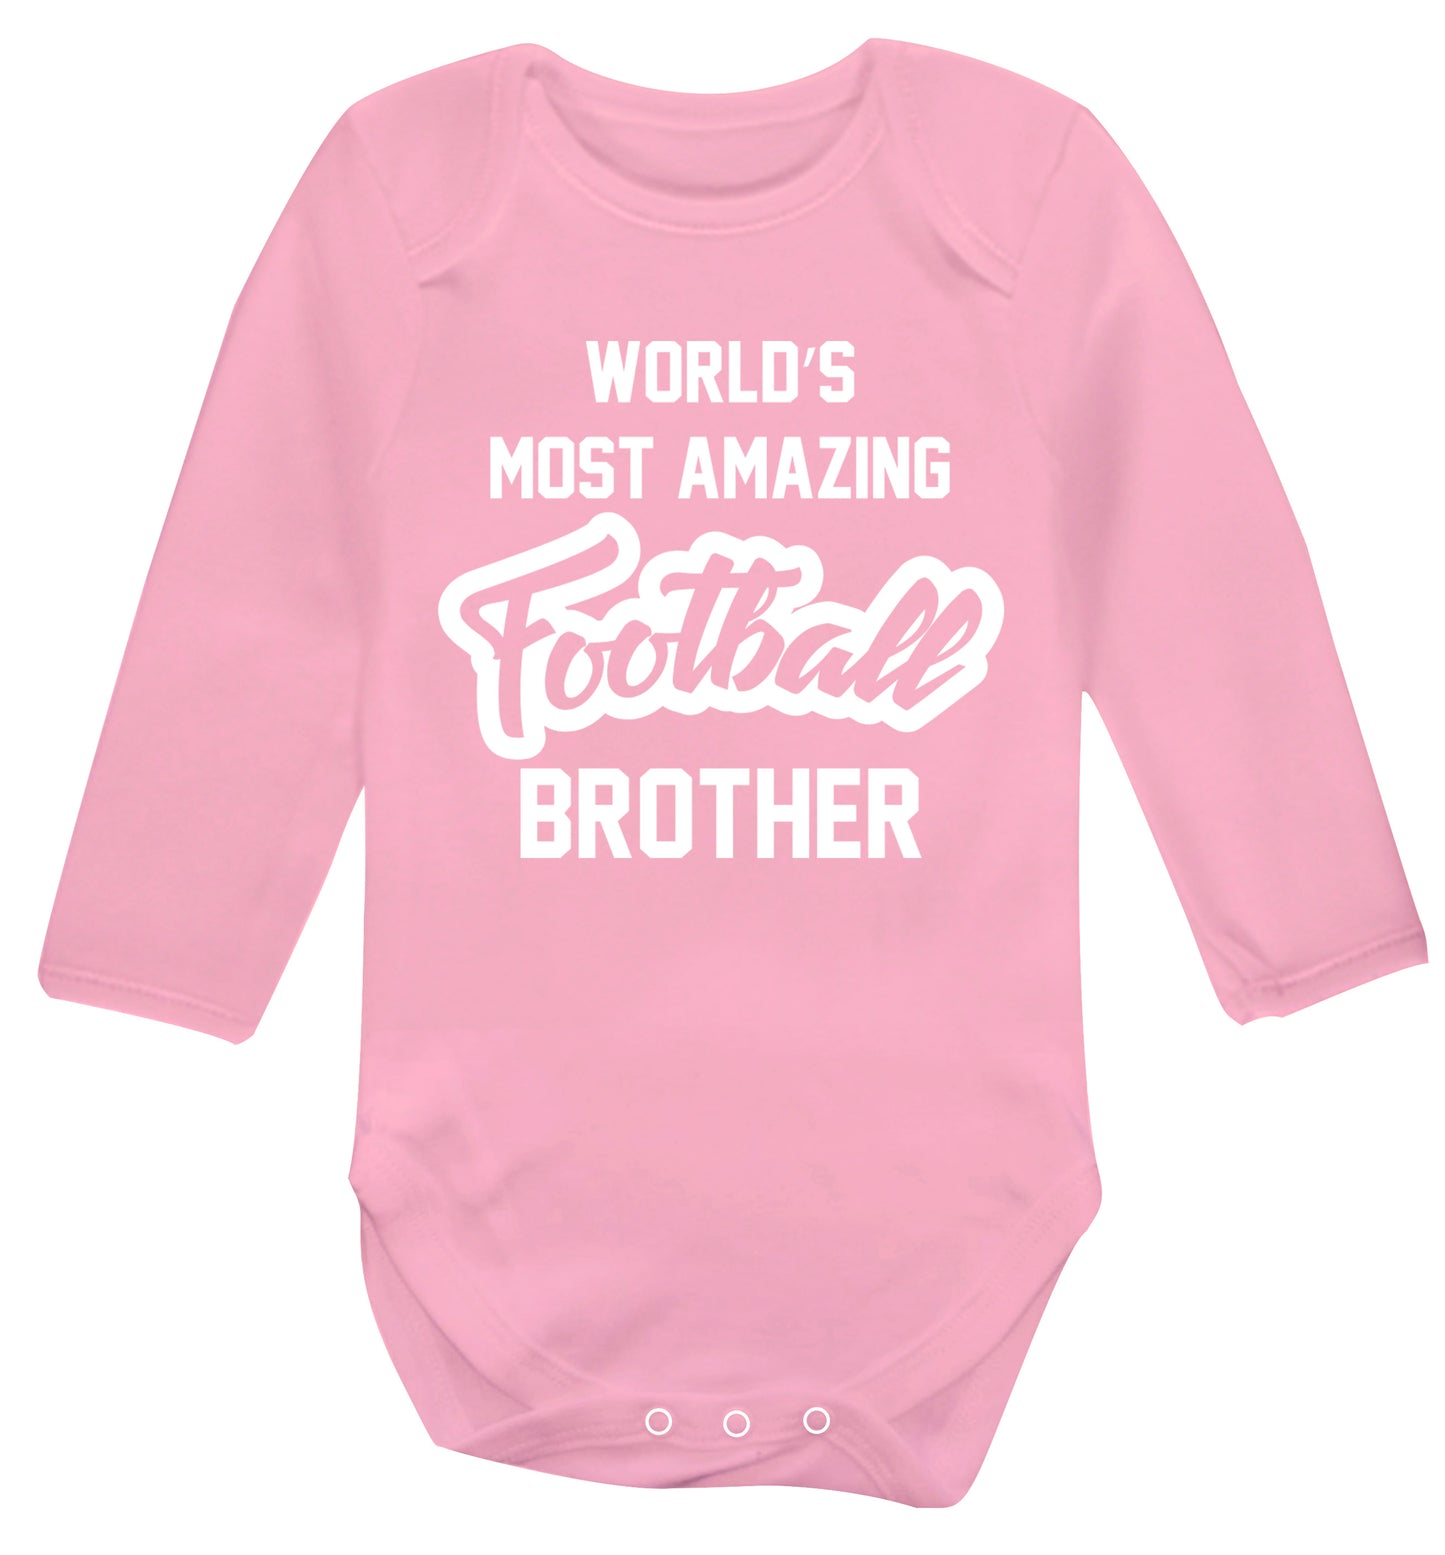 Worlds most amazing football brother Baby Vest long sleeved pale pink 6-12 months